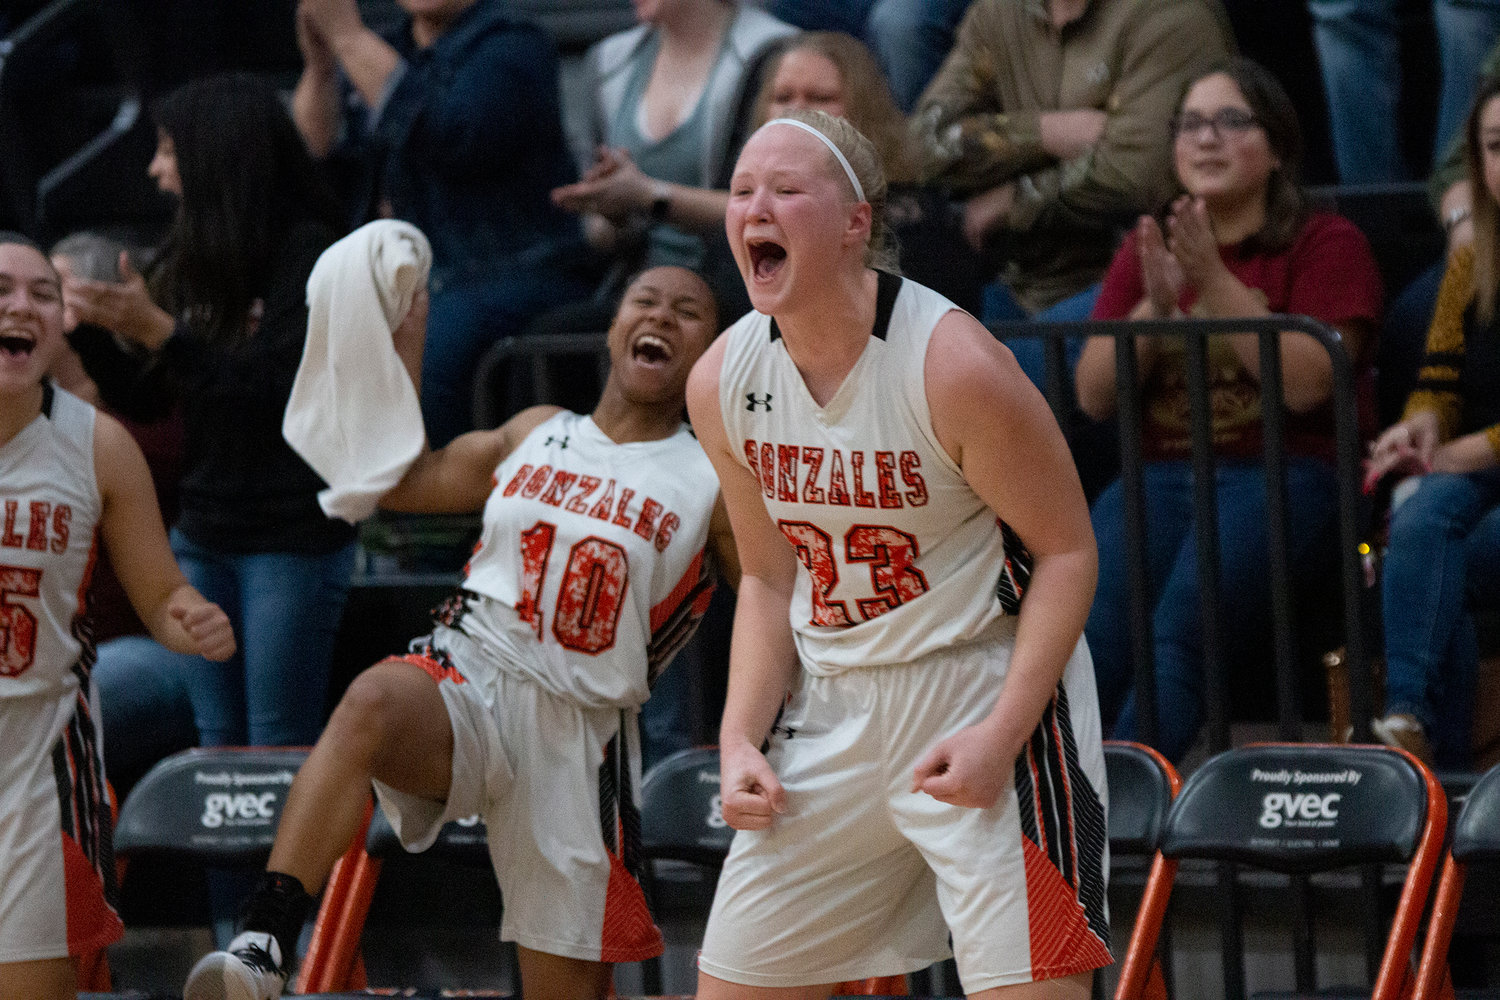 Devon Williams (23) celebrates a shot being made by her teammates on the court in Gonzales’ 47-19 victory over Pleasanton last Friday. The Lady Apaches open playoffs with a bi-district matchup against Hondo next Tuesday, Feb. 18 at Floresville. Tipoff is scheduled for 7 p.m.